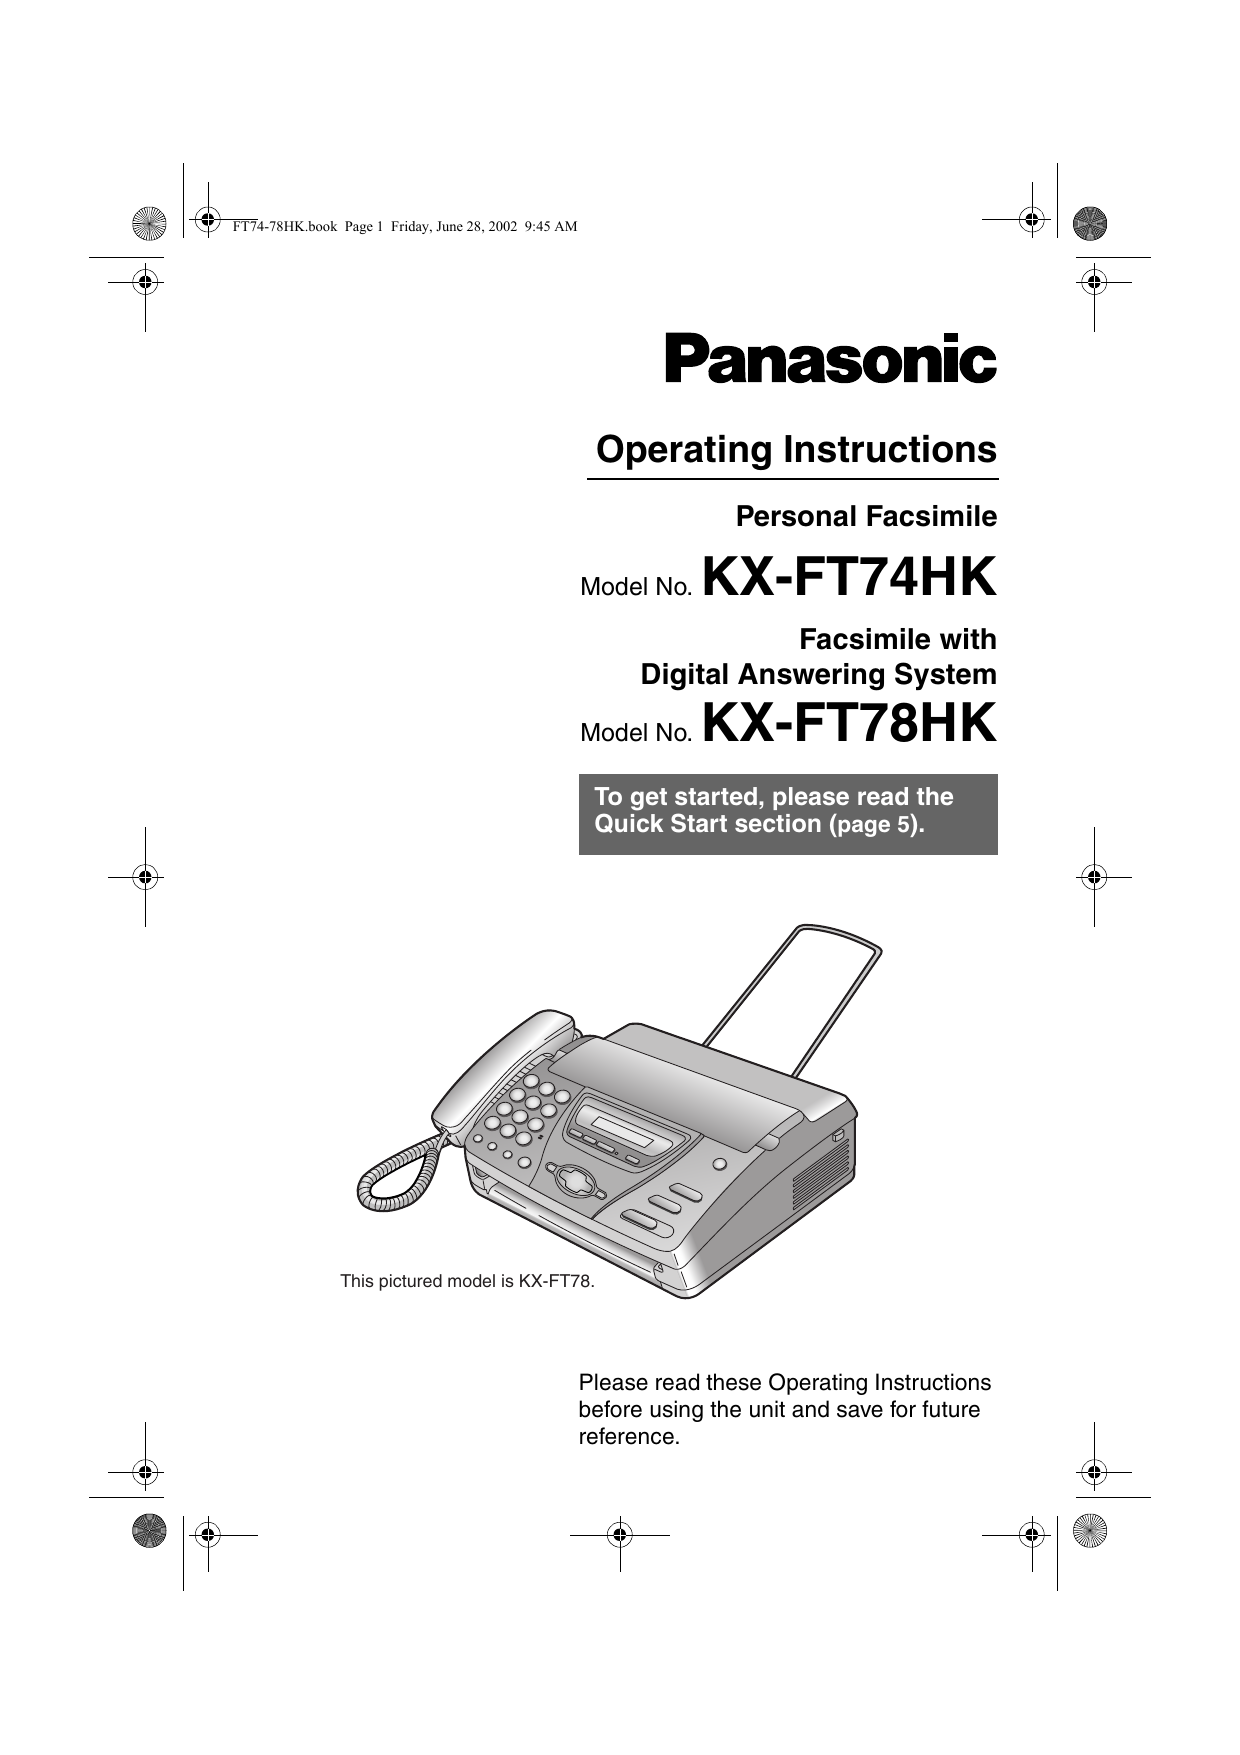 Specifications - Panasonic KX-FT932FX Operating Instructions